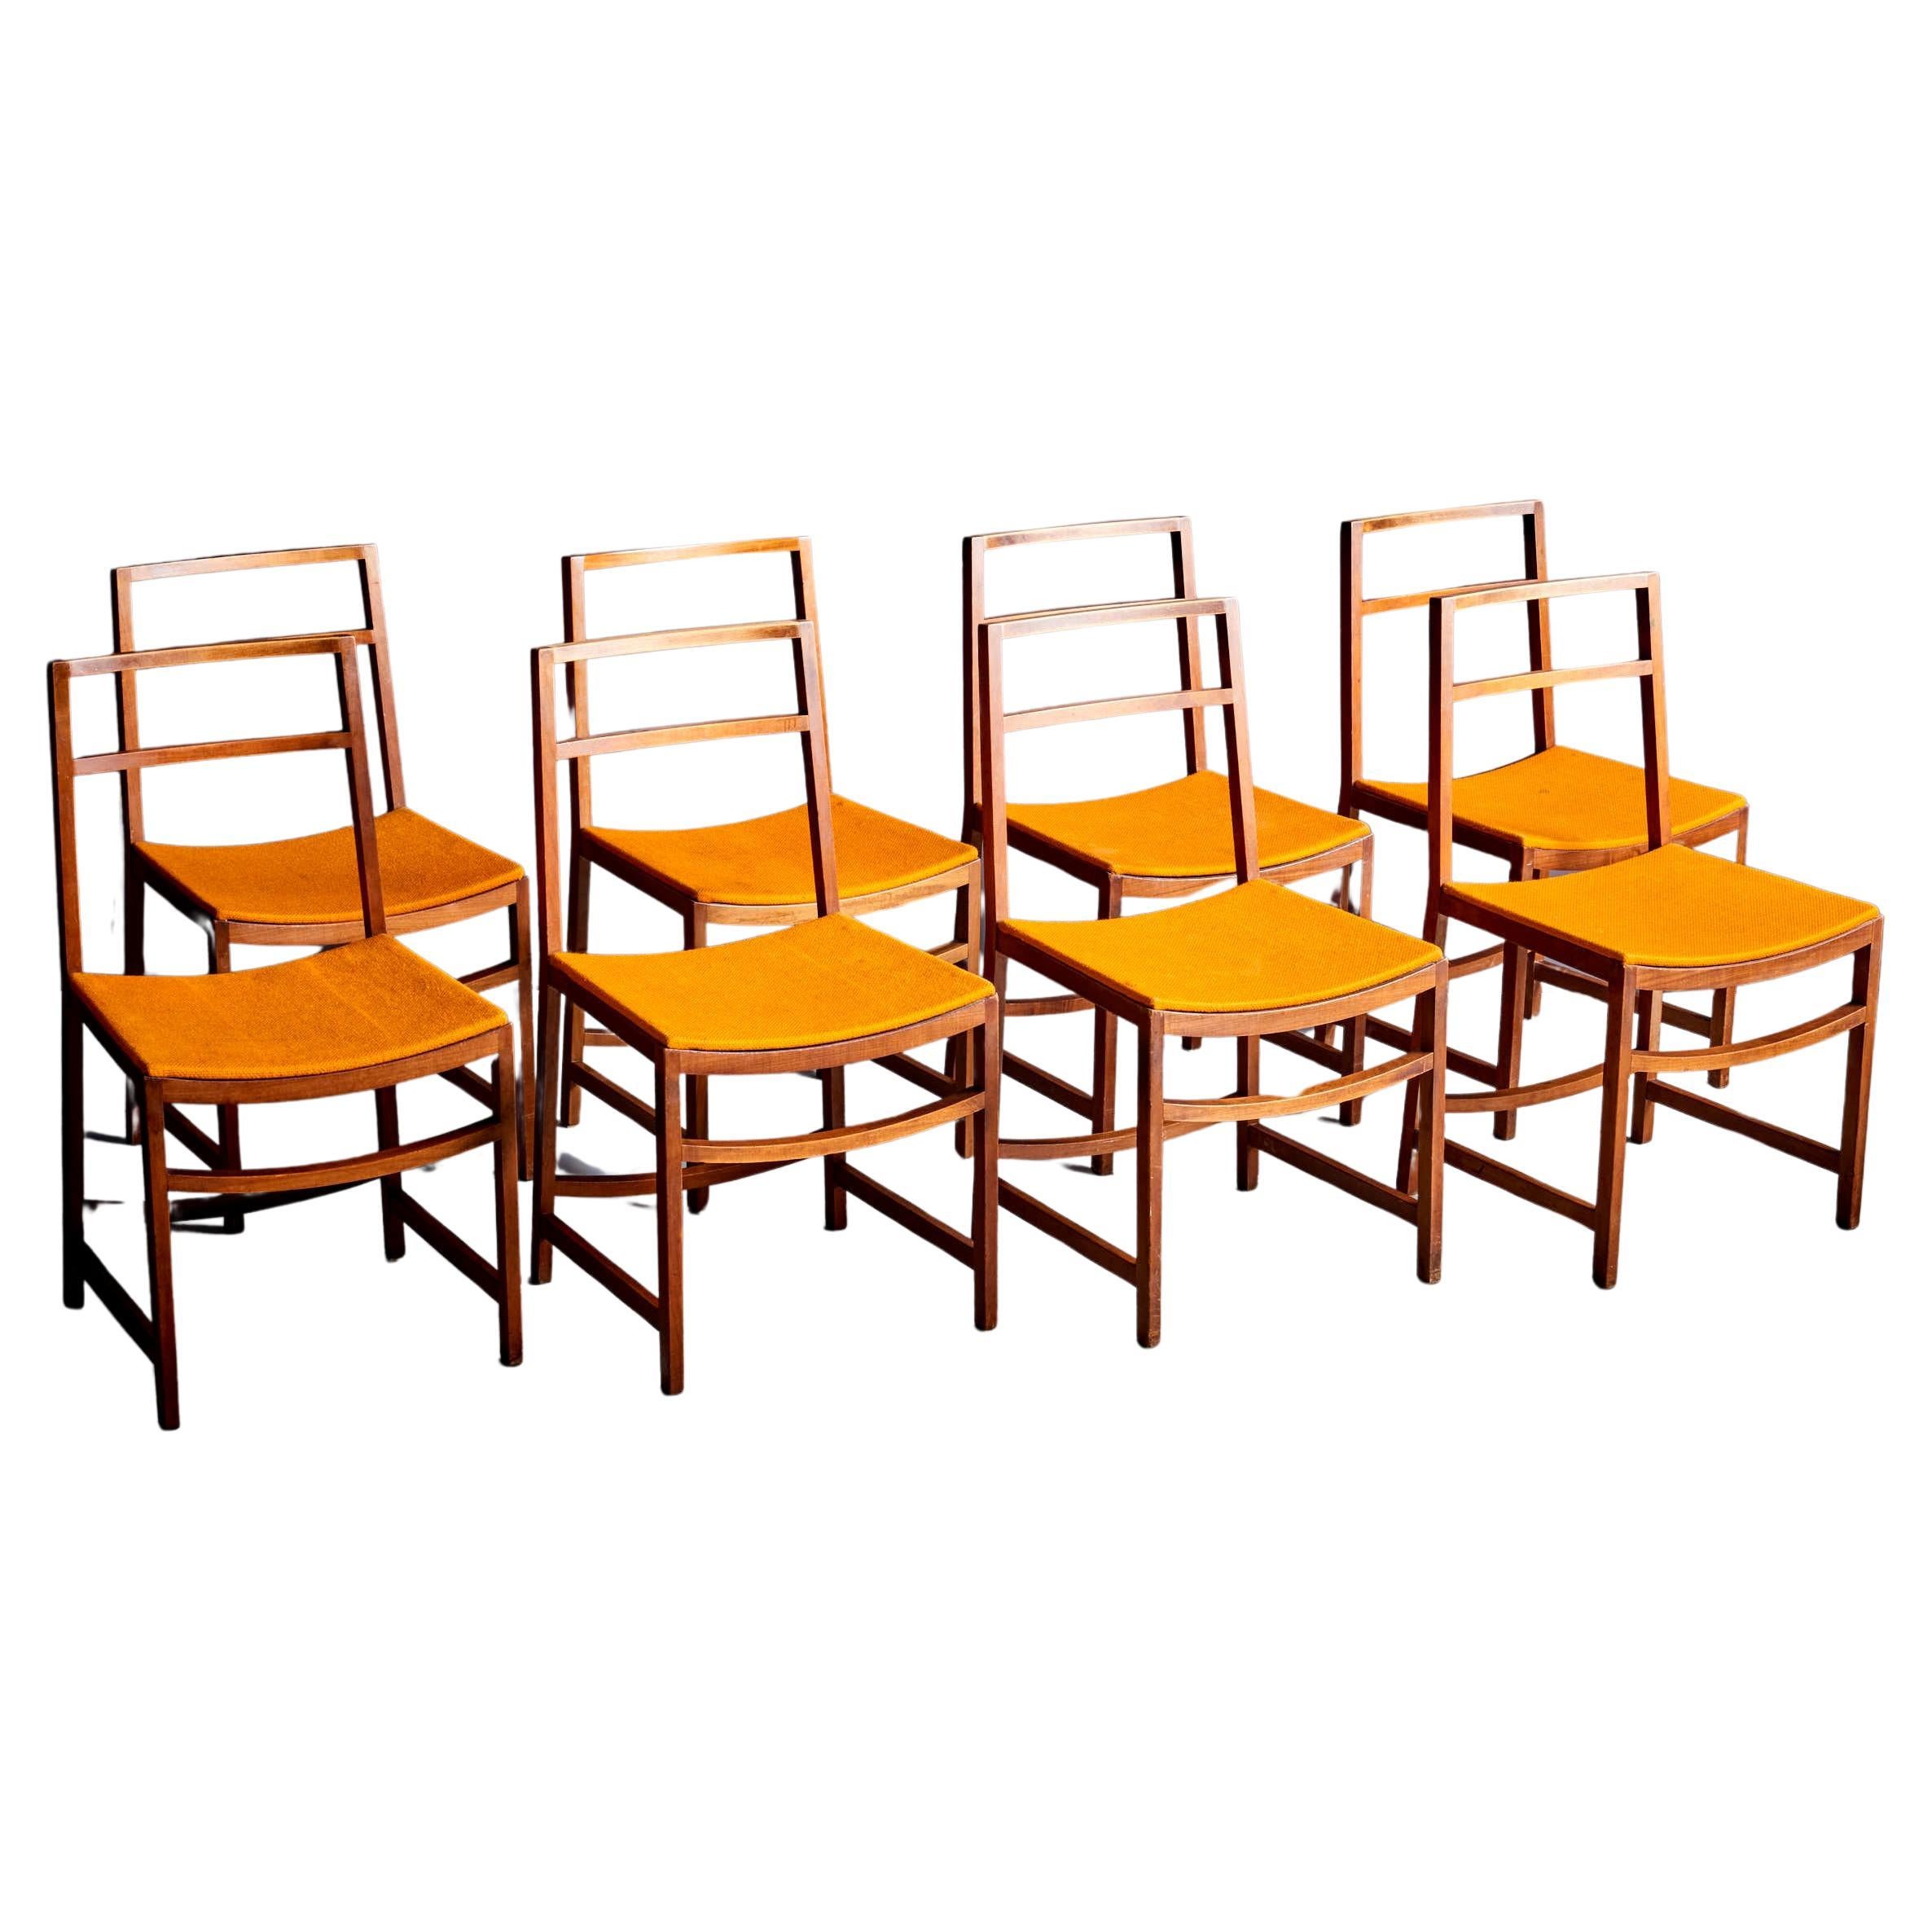 Ico Parisi for MIM Set of 8 Dining Chairs, Italy - 1950s 